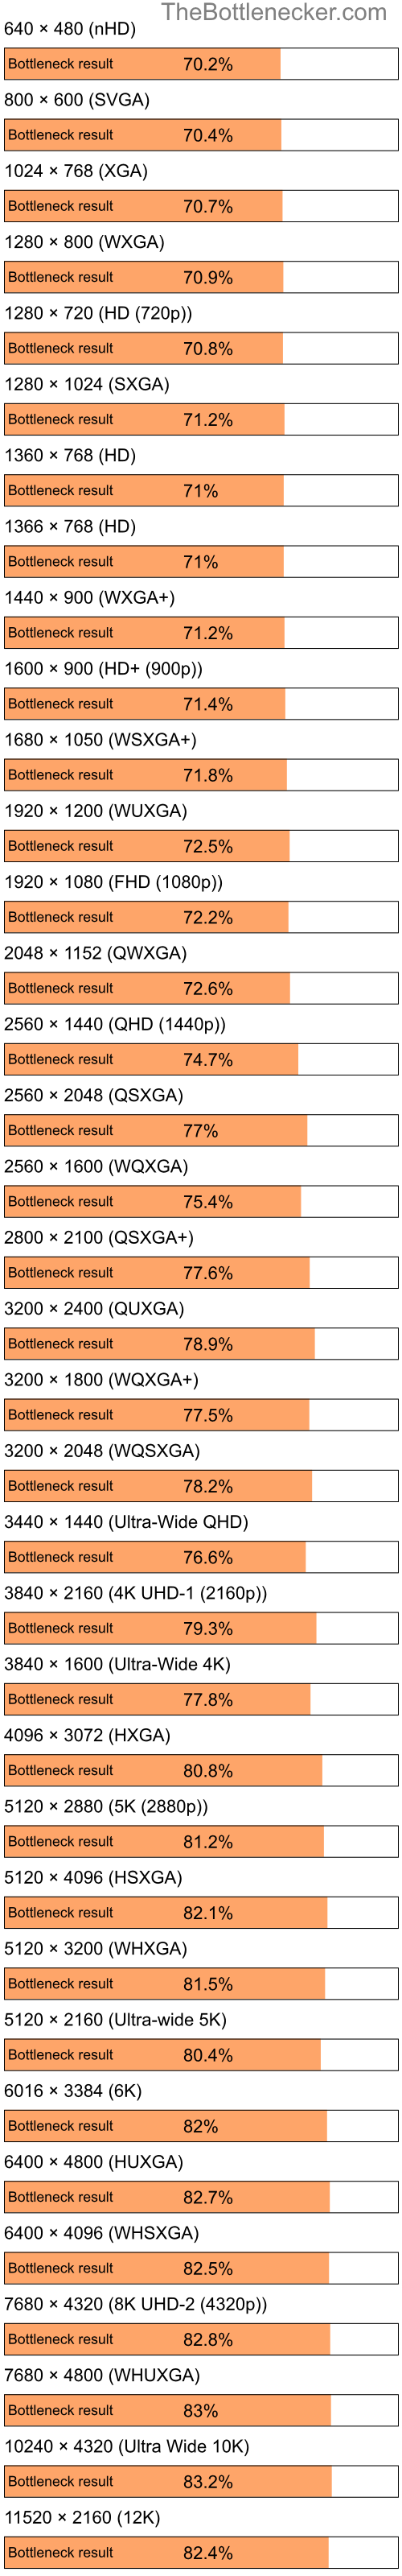 Bottleneck results by resolution for Intel Pentium 4 and AMD Mobility Radeon X1300 in Processor Intense Tasks